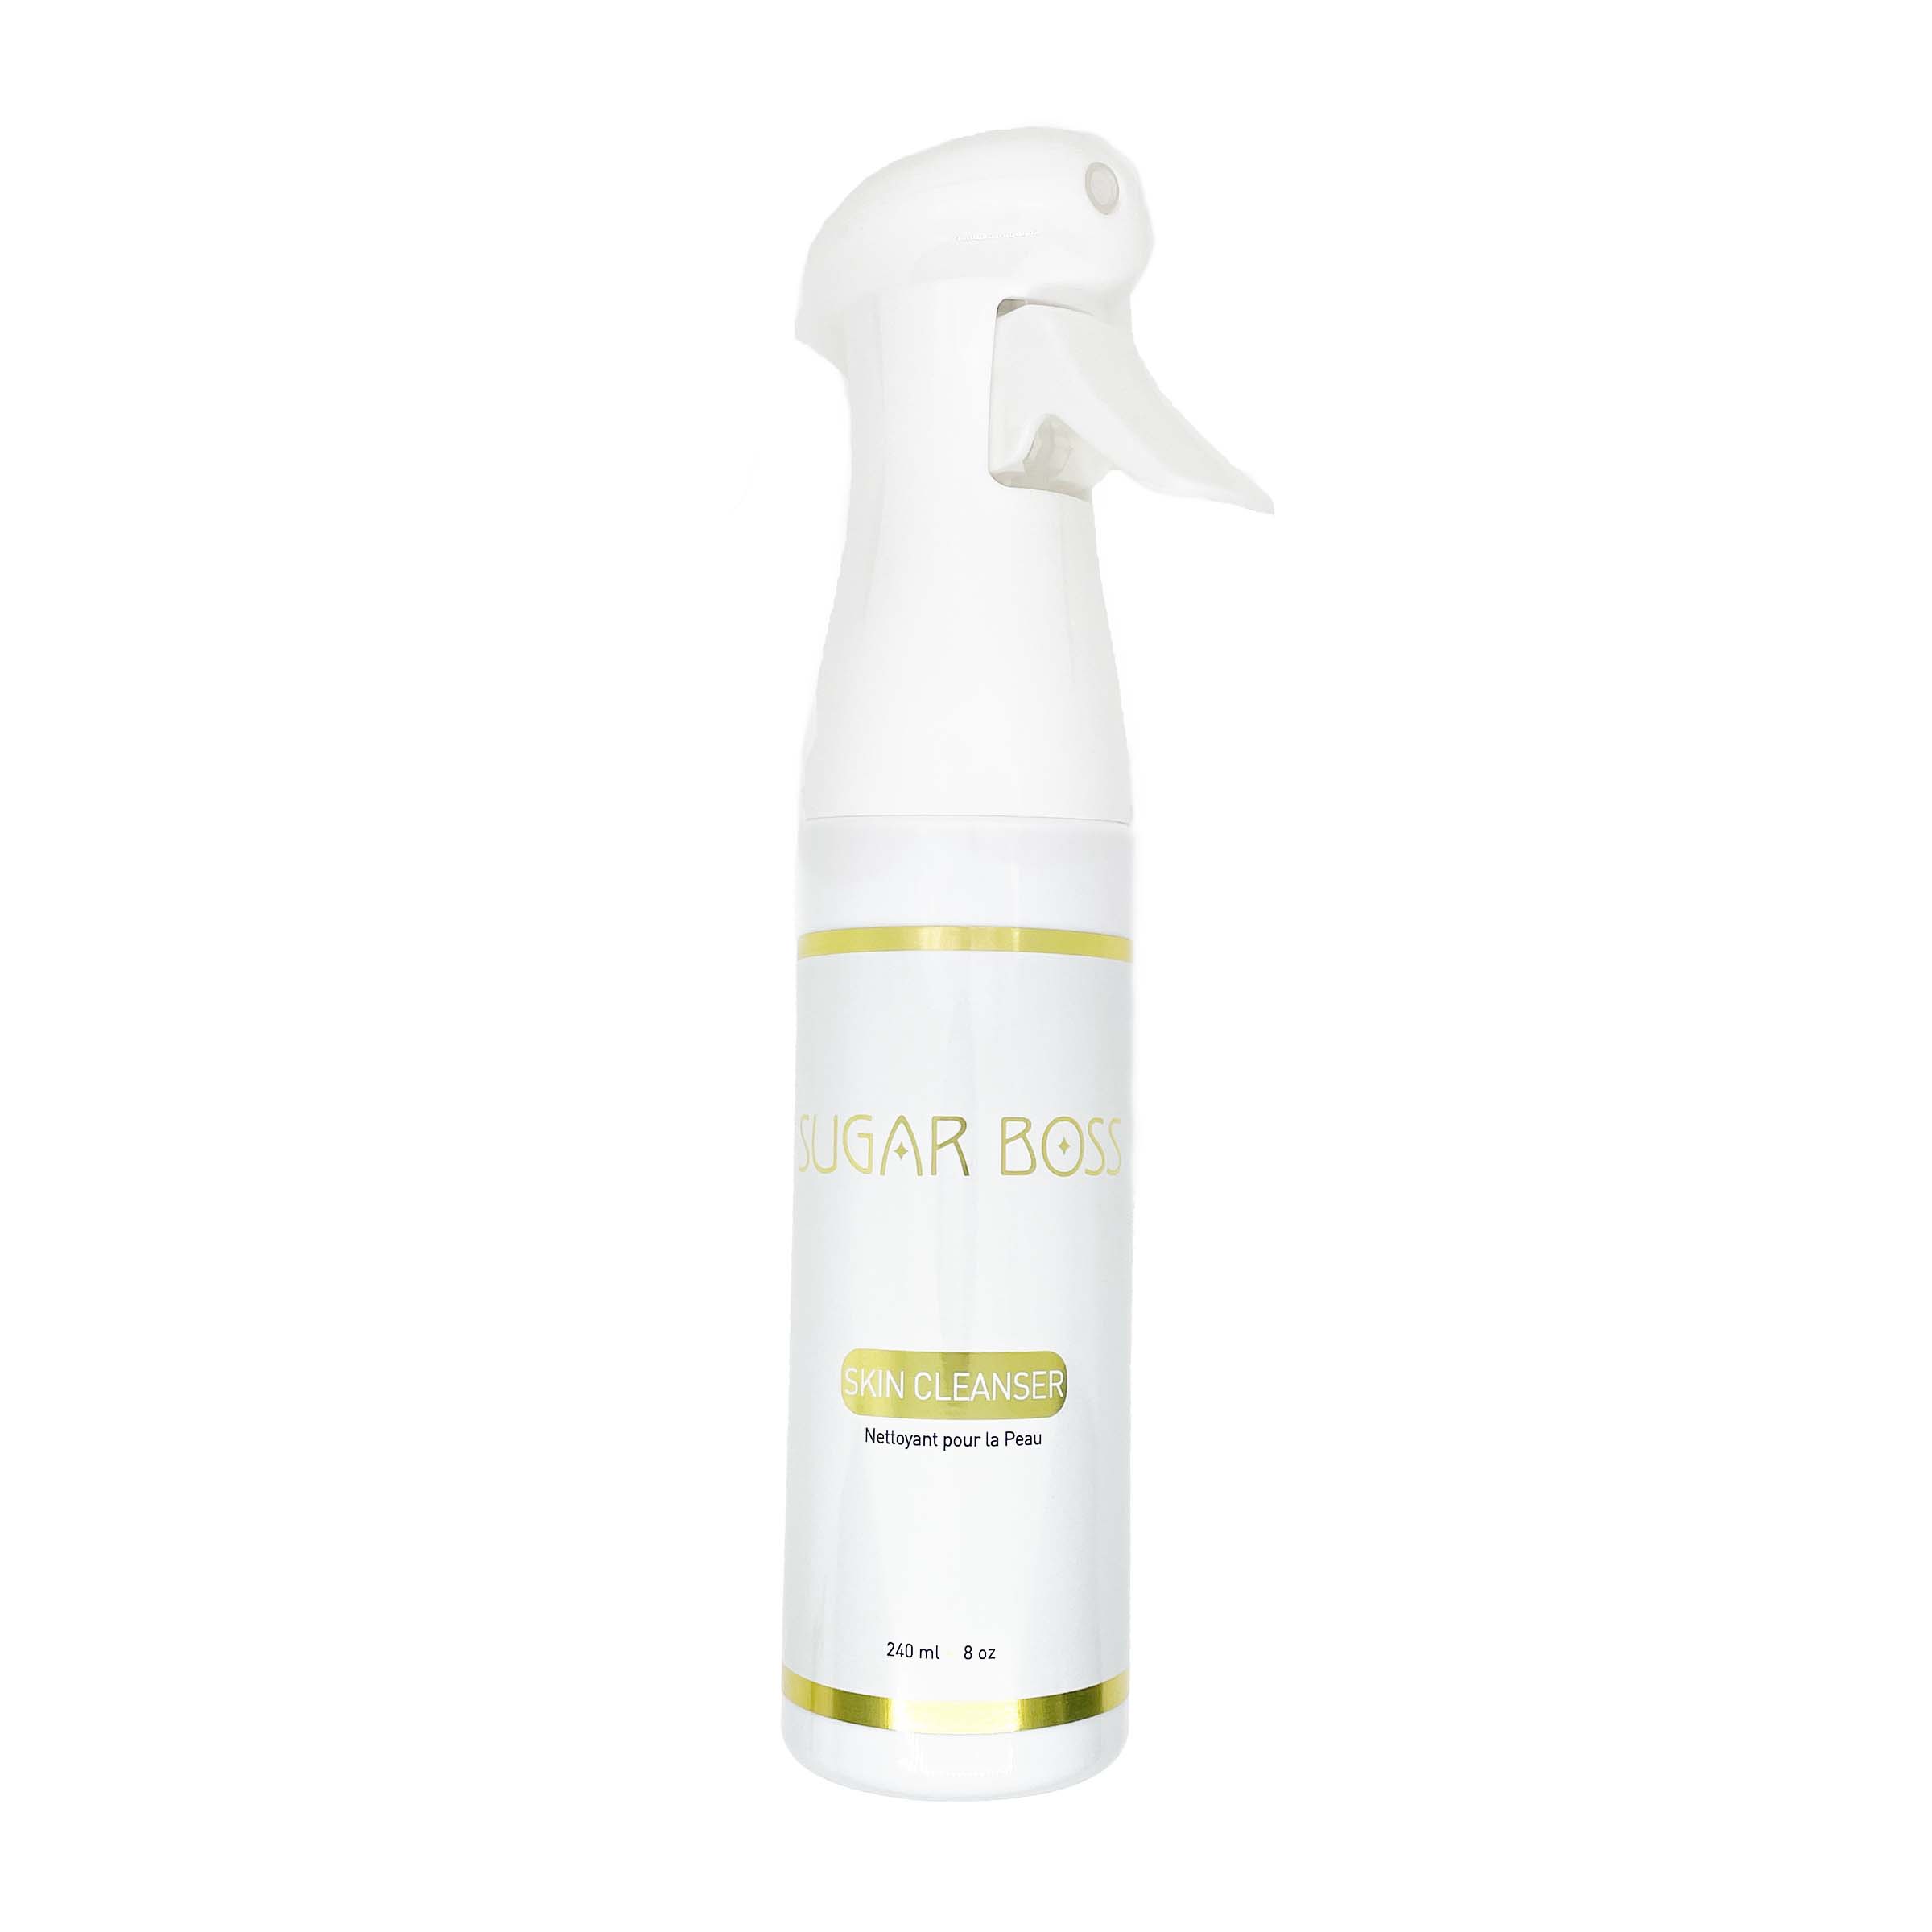 Sugar Boss - Skin Cleanser with Mister Spray Nozzle - Creata Beauty - Professional Beauty Products